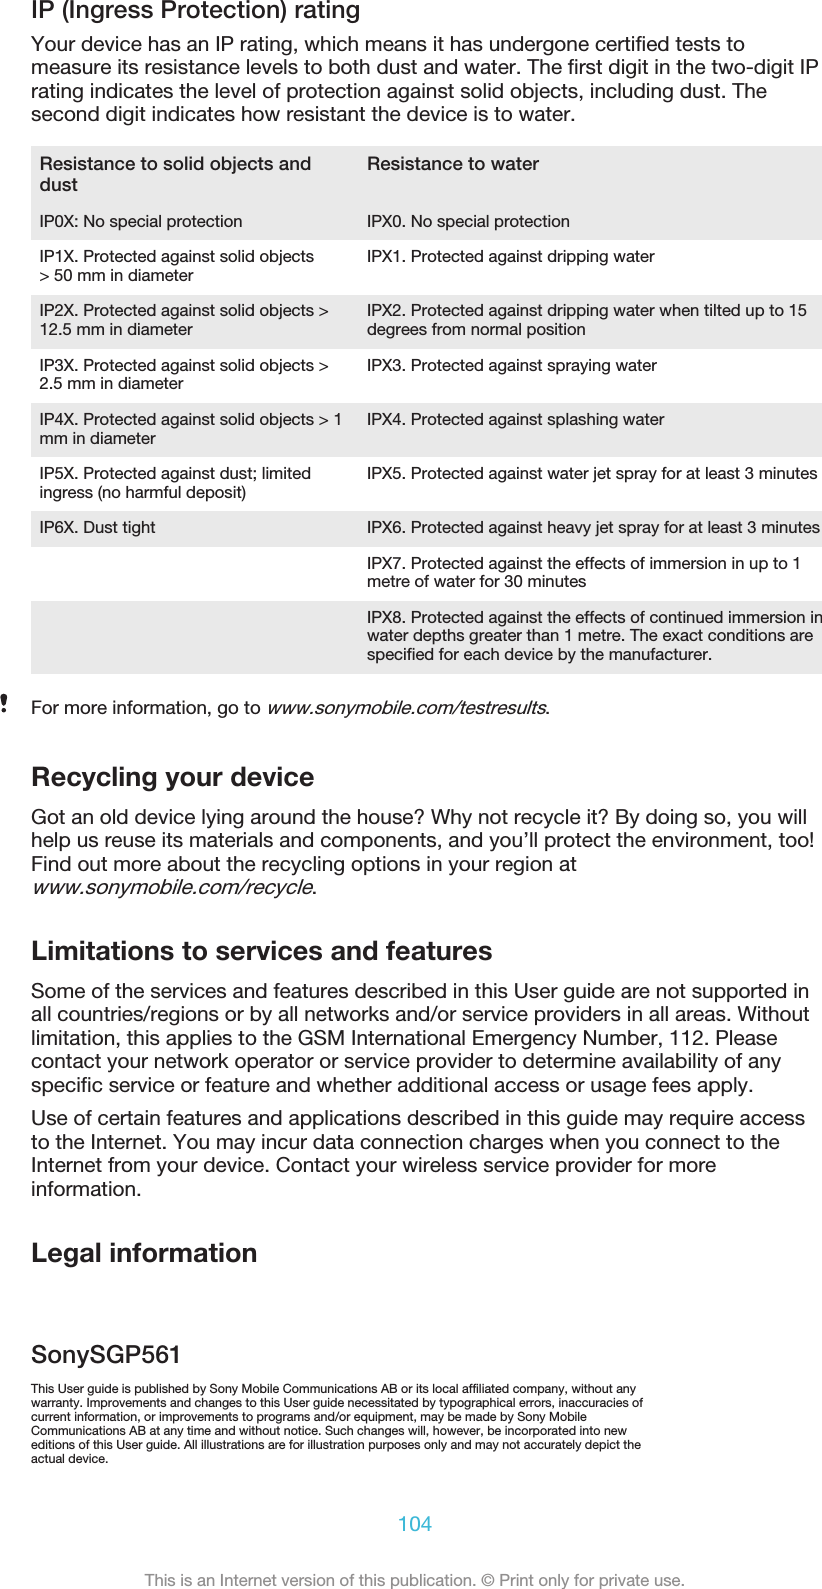 IP (Ingress Protection) ratingYour device has an IP rating, which means it has undergone certified tests tomeasure its resistance levels to both dust and water. The first digit in the two-digit IPrating indicates the level of protection against solid objects, including dust. Thesecond digit indicates how resistant the device is to water.Resistance to solid objects anddust Resistance to waterIP0X: No special protection IPX0. No special protectionIP1X. Protected against solid objects&gt; 50 mm in diameter IPX1. Protected against dripping waterIP2X. Protected against solid objects &gt;12.5 mm in diameter IPX2. Protected against dripping water when tilted up to 15degrees from normal positionIP3X. Protected against solid objects &gt;2.5 mm in diameter IPX3. Protected against spraying waterIP4X. Protected against solid objects &gt; 1mm in diameter IPX4. Protected against splashing waterIP5X. Protected against dust; limitedingress (no harmful deposit) IPX5. Protected against water jet spray for at least 3 minutesIP6X. Dust tight IPX6. Protected against heavy jet spray for at least 3 minutes  IPX7. Protected against the effects of immersion in up to 1metre of water for 30 minutes  IPX8. Protected against the effects of continued immersion inwater depths greater than 1 metre. The exact conditions arespecified for each device by the manufacturer.For more information, go to www.sonymobile.com/testresults.Recycling your deviceGot an old device lying around the house? Why not recycle it? By doing so, you willhelp us reuse its materials and components, and you’ll protect the environment, too!Find out more about the recycling options in your region atwww.sonymobile.com/recycle.Limitations to services and featuresSome of the services and features described in this User guide are not supported inall countries/regions or by all networks and/or service providers in all areas. Withoutlimitation, this applies to the GSM International Emergency Number, 112. Pleasecontact your network operator or service provider to determine availability of anyspecific service or feature and whether additional access or usage fees apply.Use of certain features and applications described in this guide may require accessto the Internet. You may incur data connection charges when you connect to theInternet from your device. Contact your wireless service provider for moreinformation.Legal informationSonySGP561This User guide is published by Sony Mobile Communications AB or its local affiliated company, without anywarranty. Improvements and changes to this User guide necessitated by typographical errors, inaccuracies ofcurrent information, or improvements to programs and/or equipment, may be made by Sony MobileCommunications AB at any time and without notice. Such changes will, however, be incorporated into neweditions of this User guide. All illustrations are for illustration purposes only and may not accurately depict theactual device.104This is an Internet version of this publication. © Print only for private use.